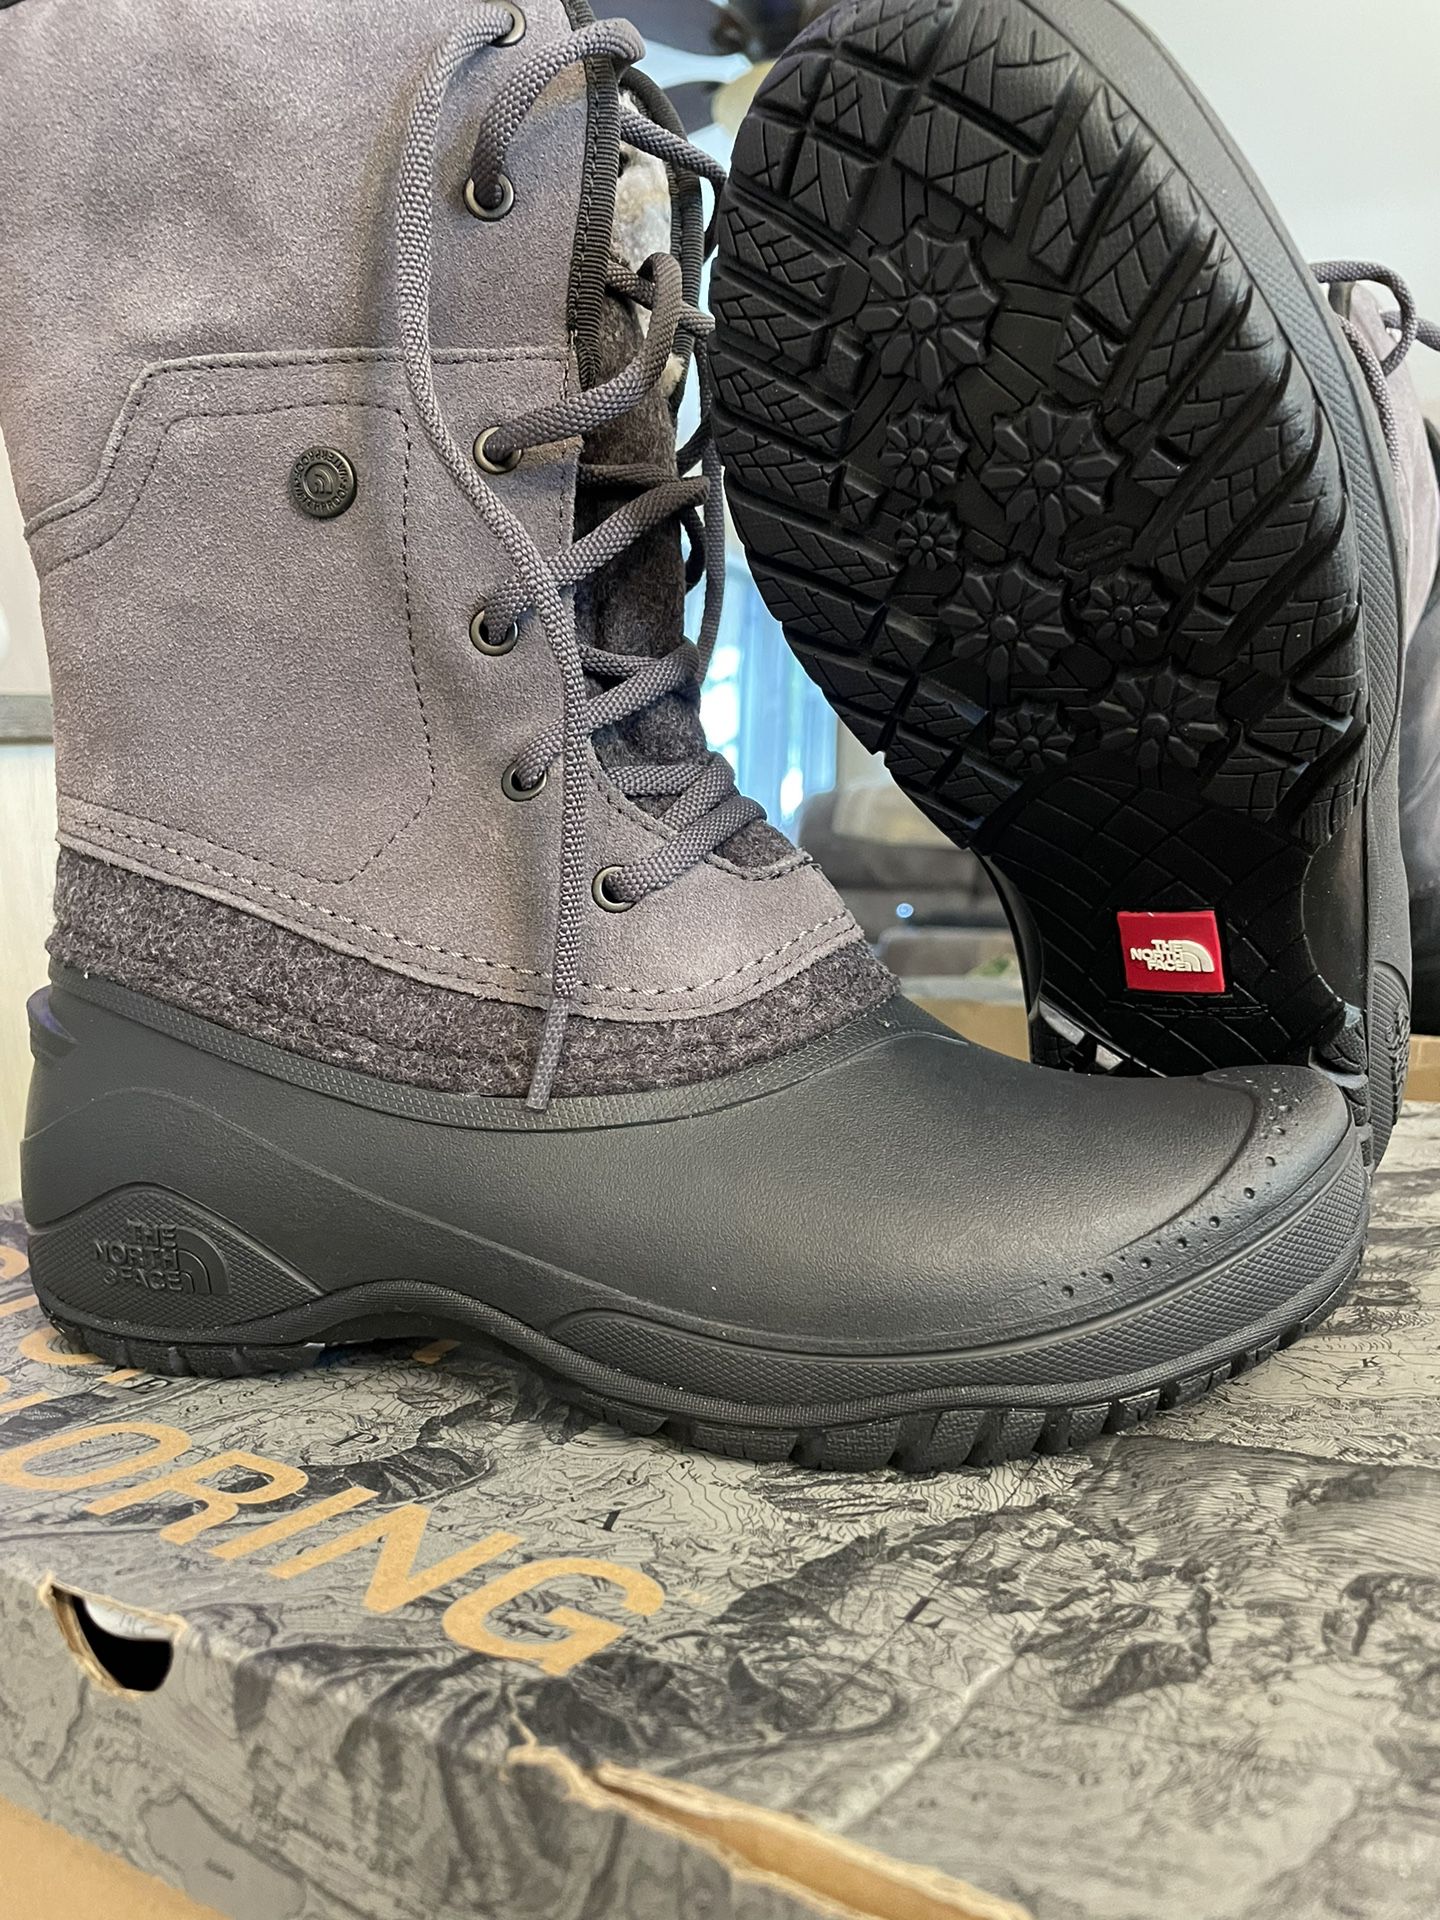 NWT North Face Women’s Roll Down Shellista Snow Boots